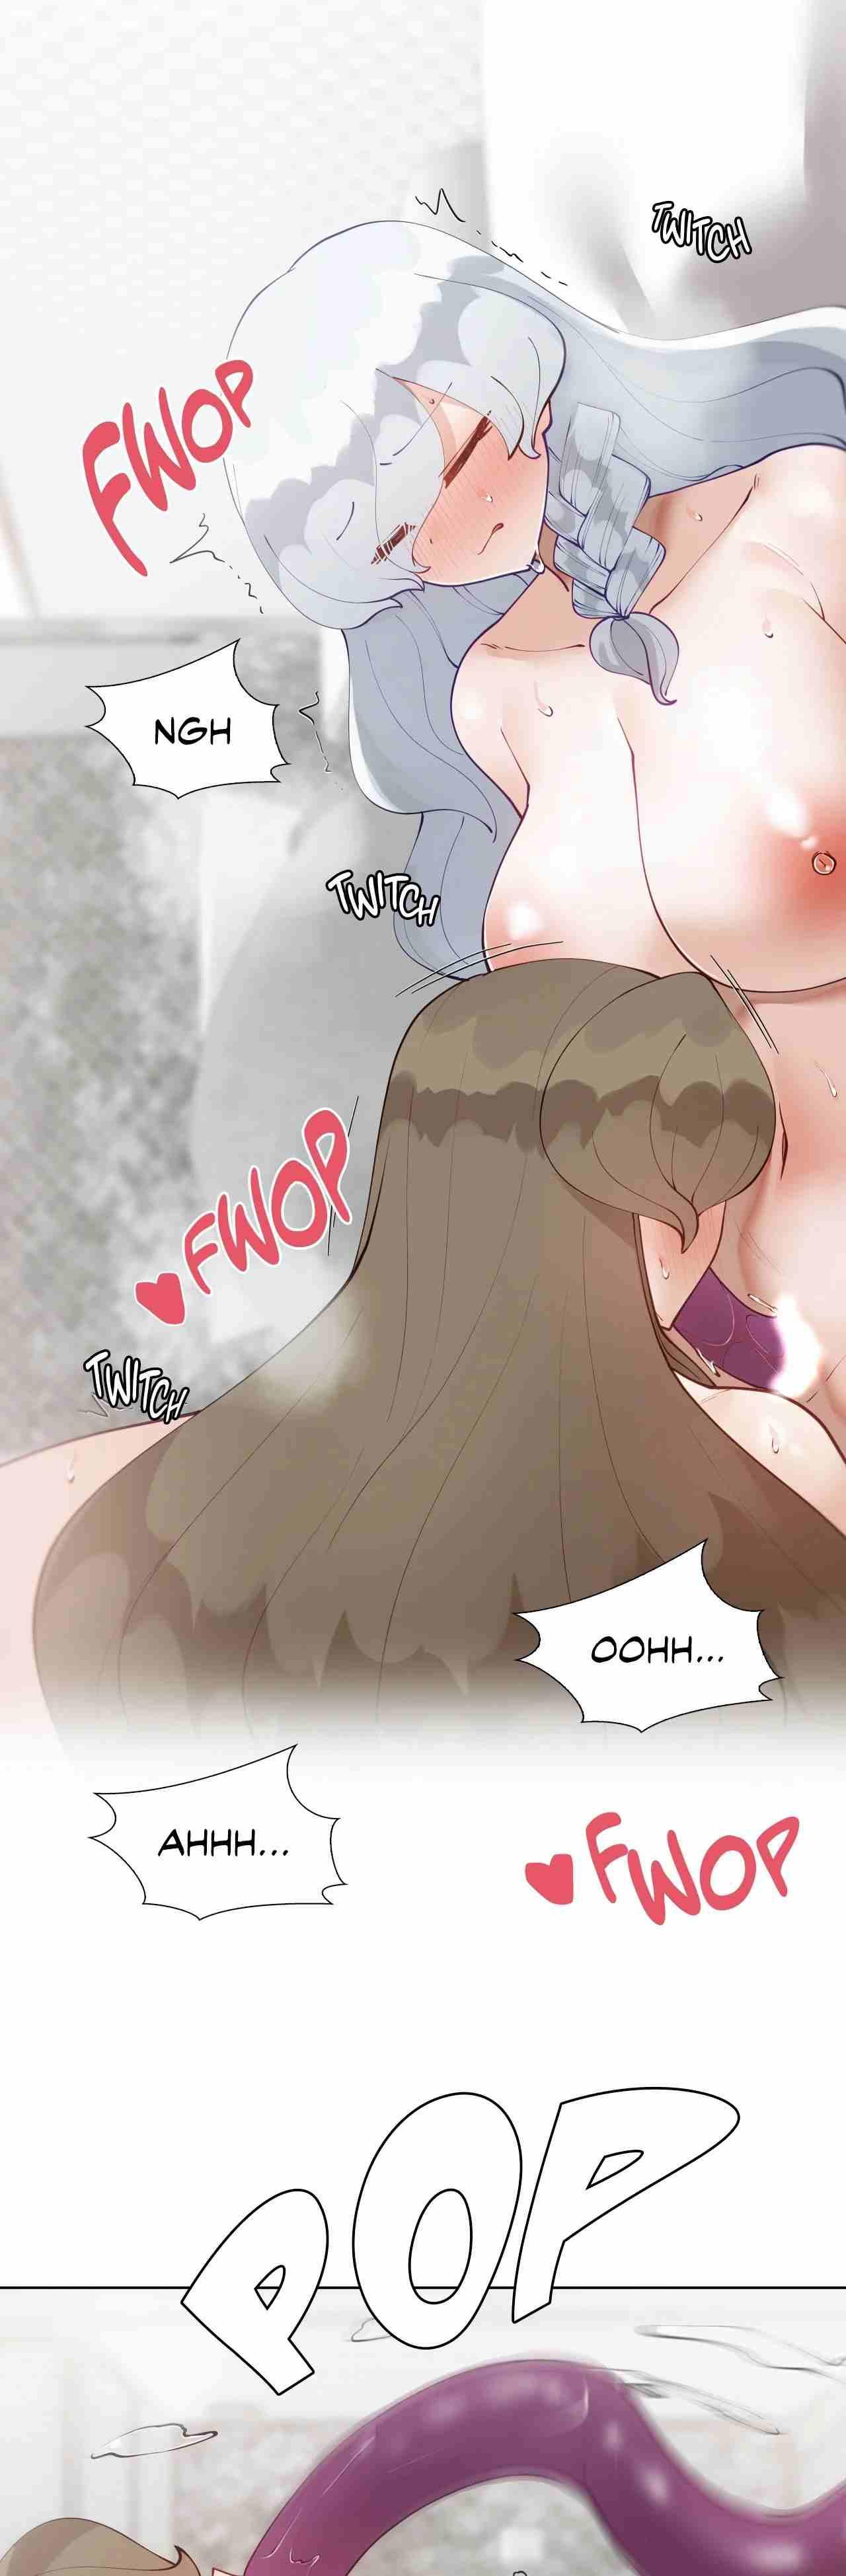 [Over.J, Choi Tae-young] Learning the Hard Way 2nd Season (After Story) Ch.4/? [English] [Manhwa PDF] Ongoing 73